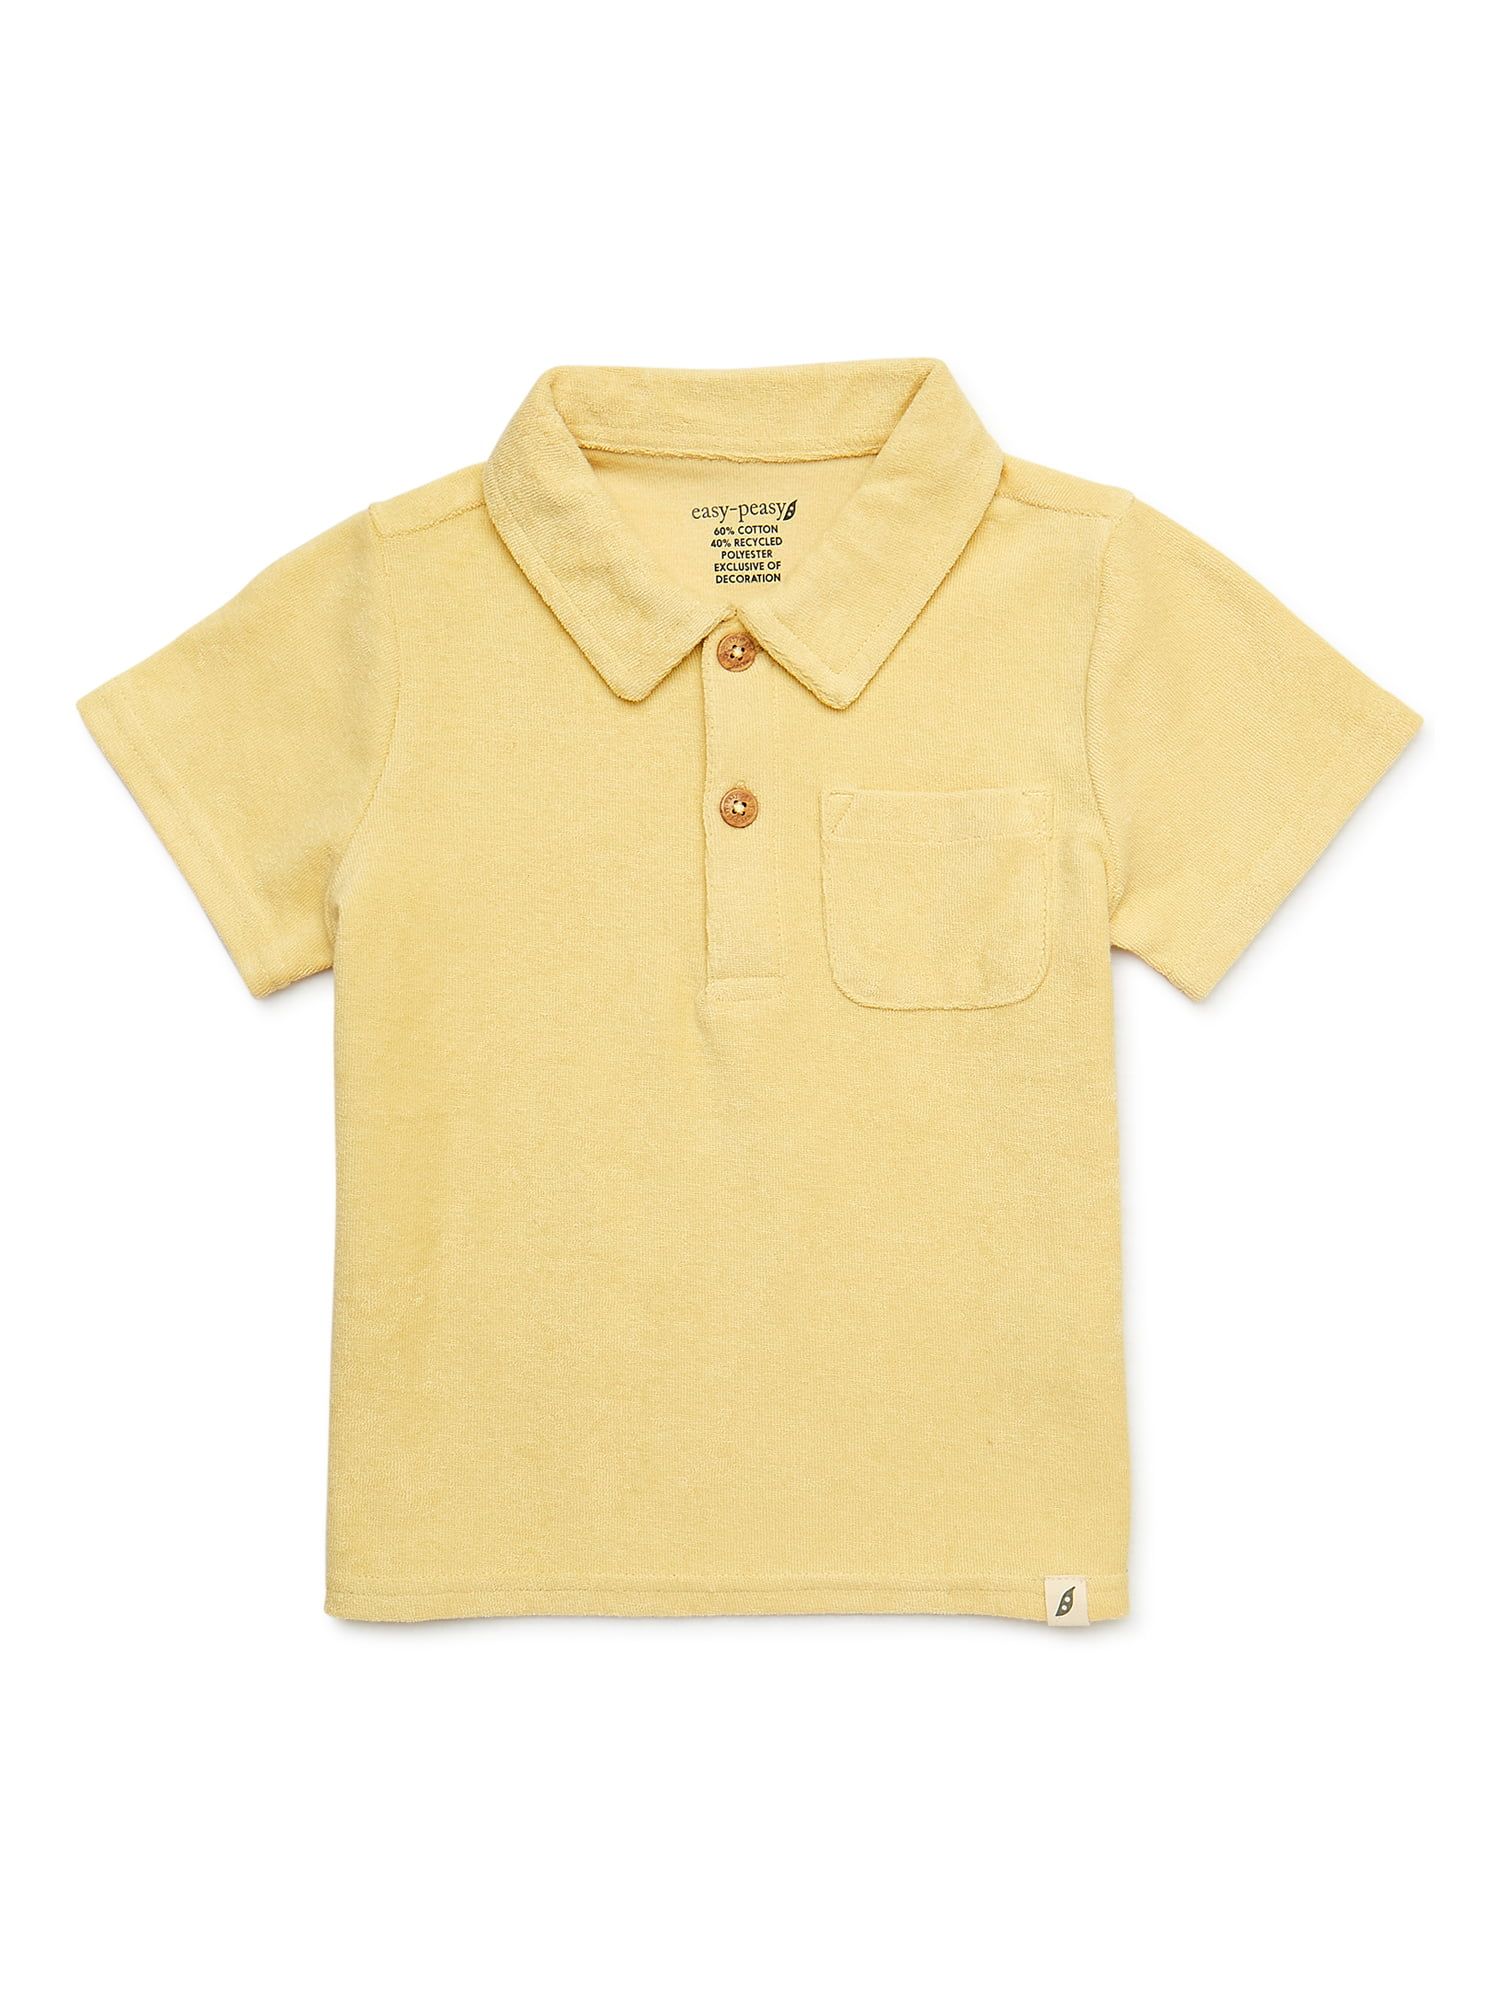 easy-peasy Toddler Boy Terry Short Sleeve Polo, Sizes 12M-5T | Walmart (US)